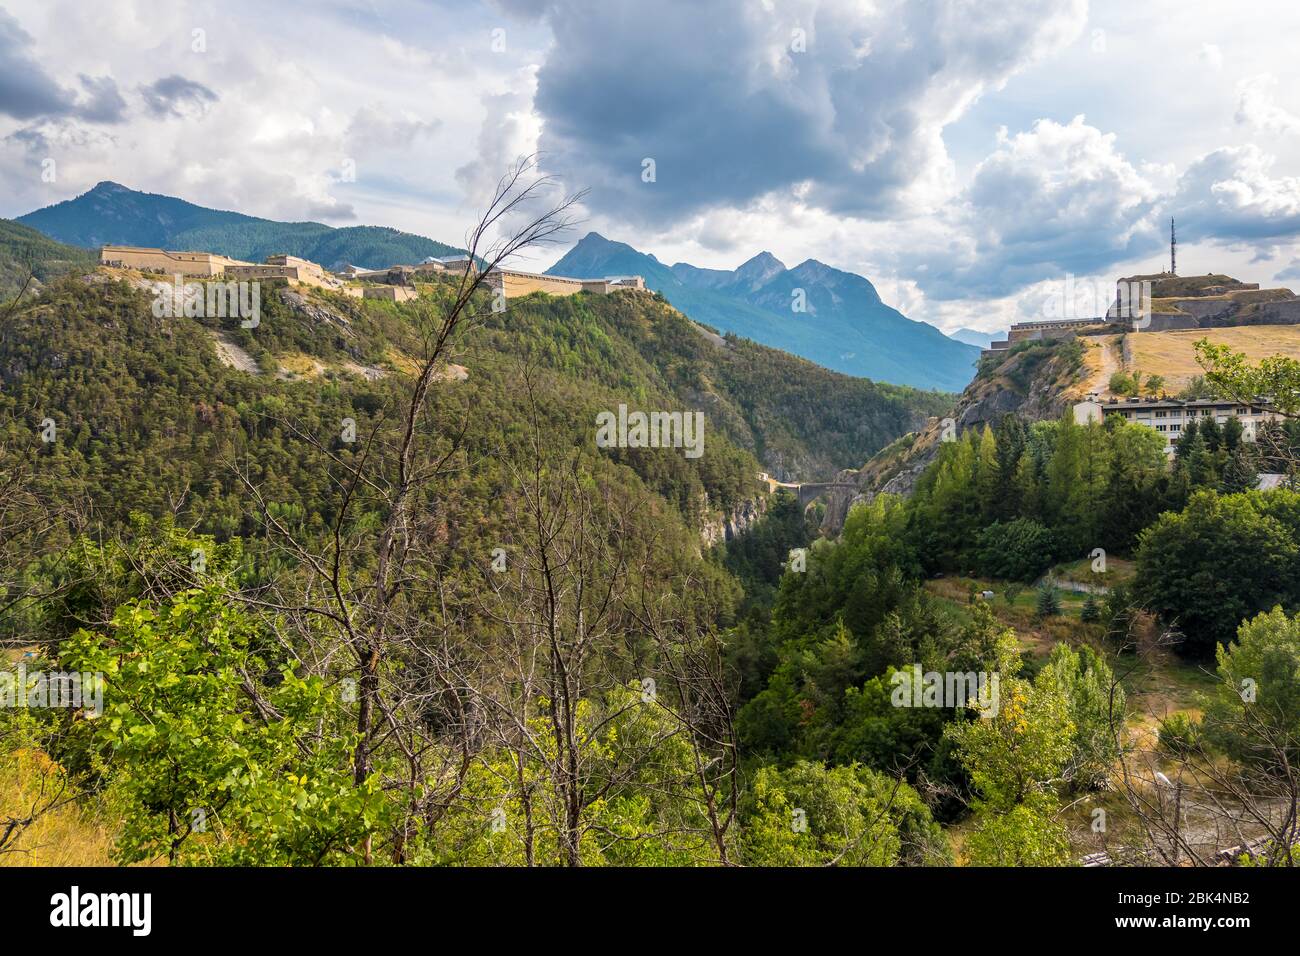 Exilles, Italy - August 21, 2019: The Exilles Fort is a fortified complex in the Susa Valley, Metropolitan City of Turin, Piedmont, northern Italy Stock Photo